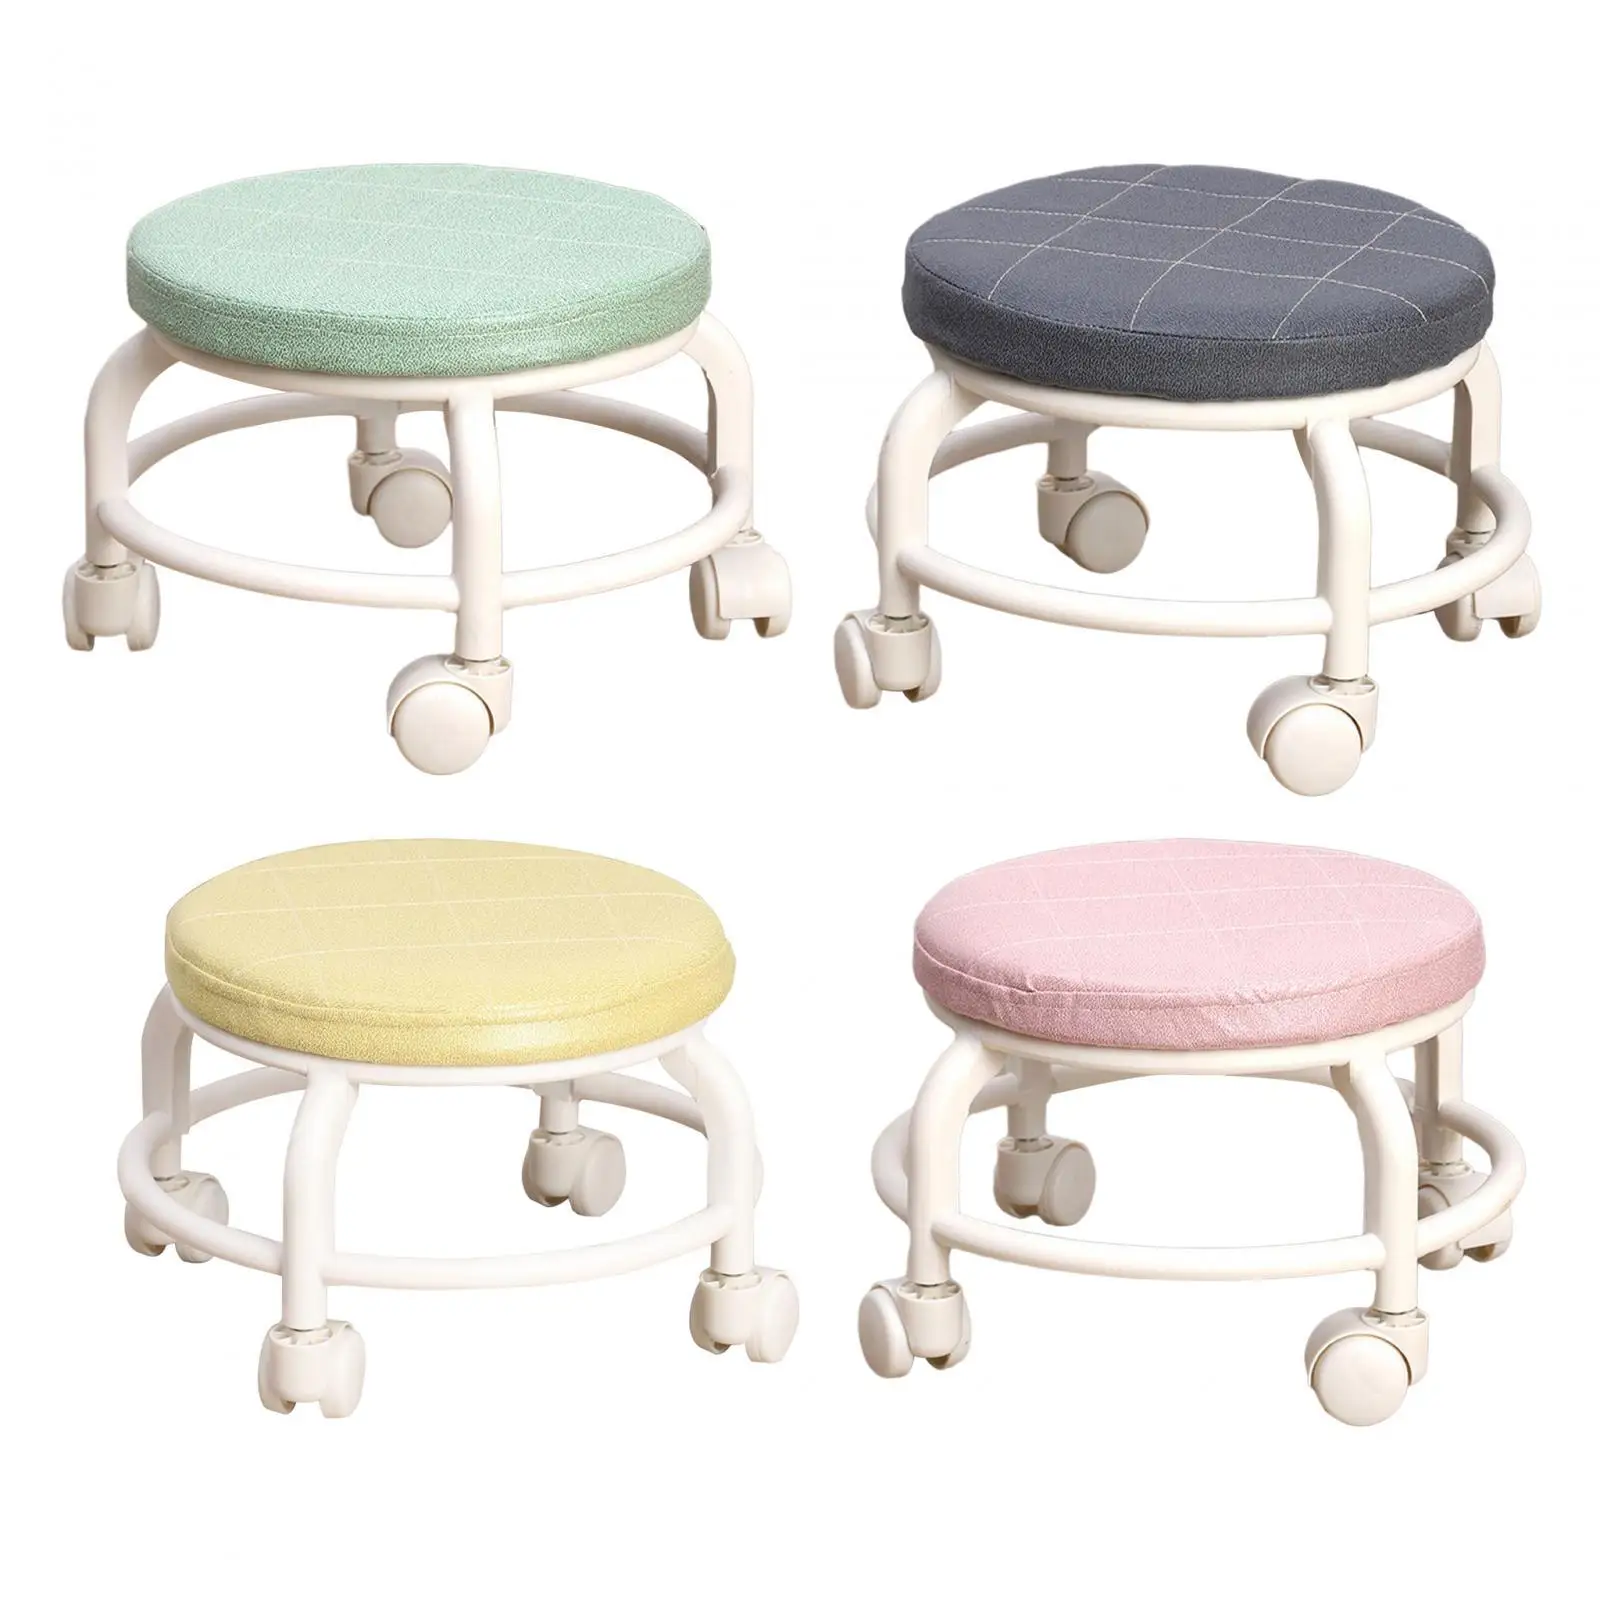 Low Round Roller Seat Stool Portable Footrest 360 Degree Rotating Rolling Stool Pulley Wheel Stool Salons Kitchen